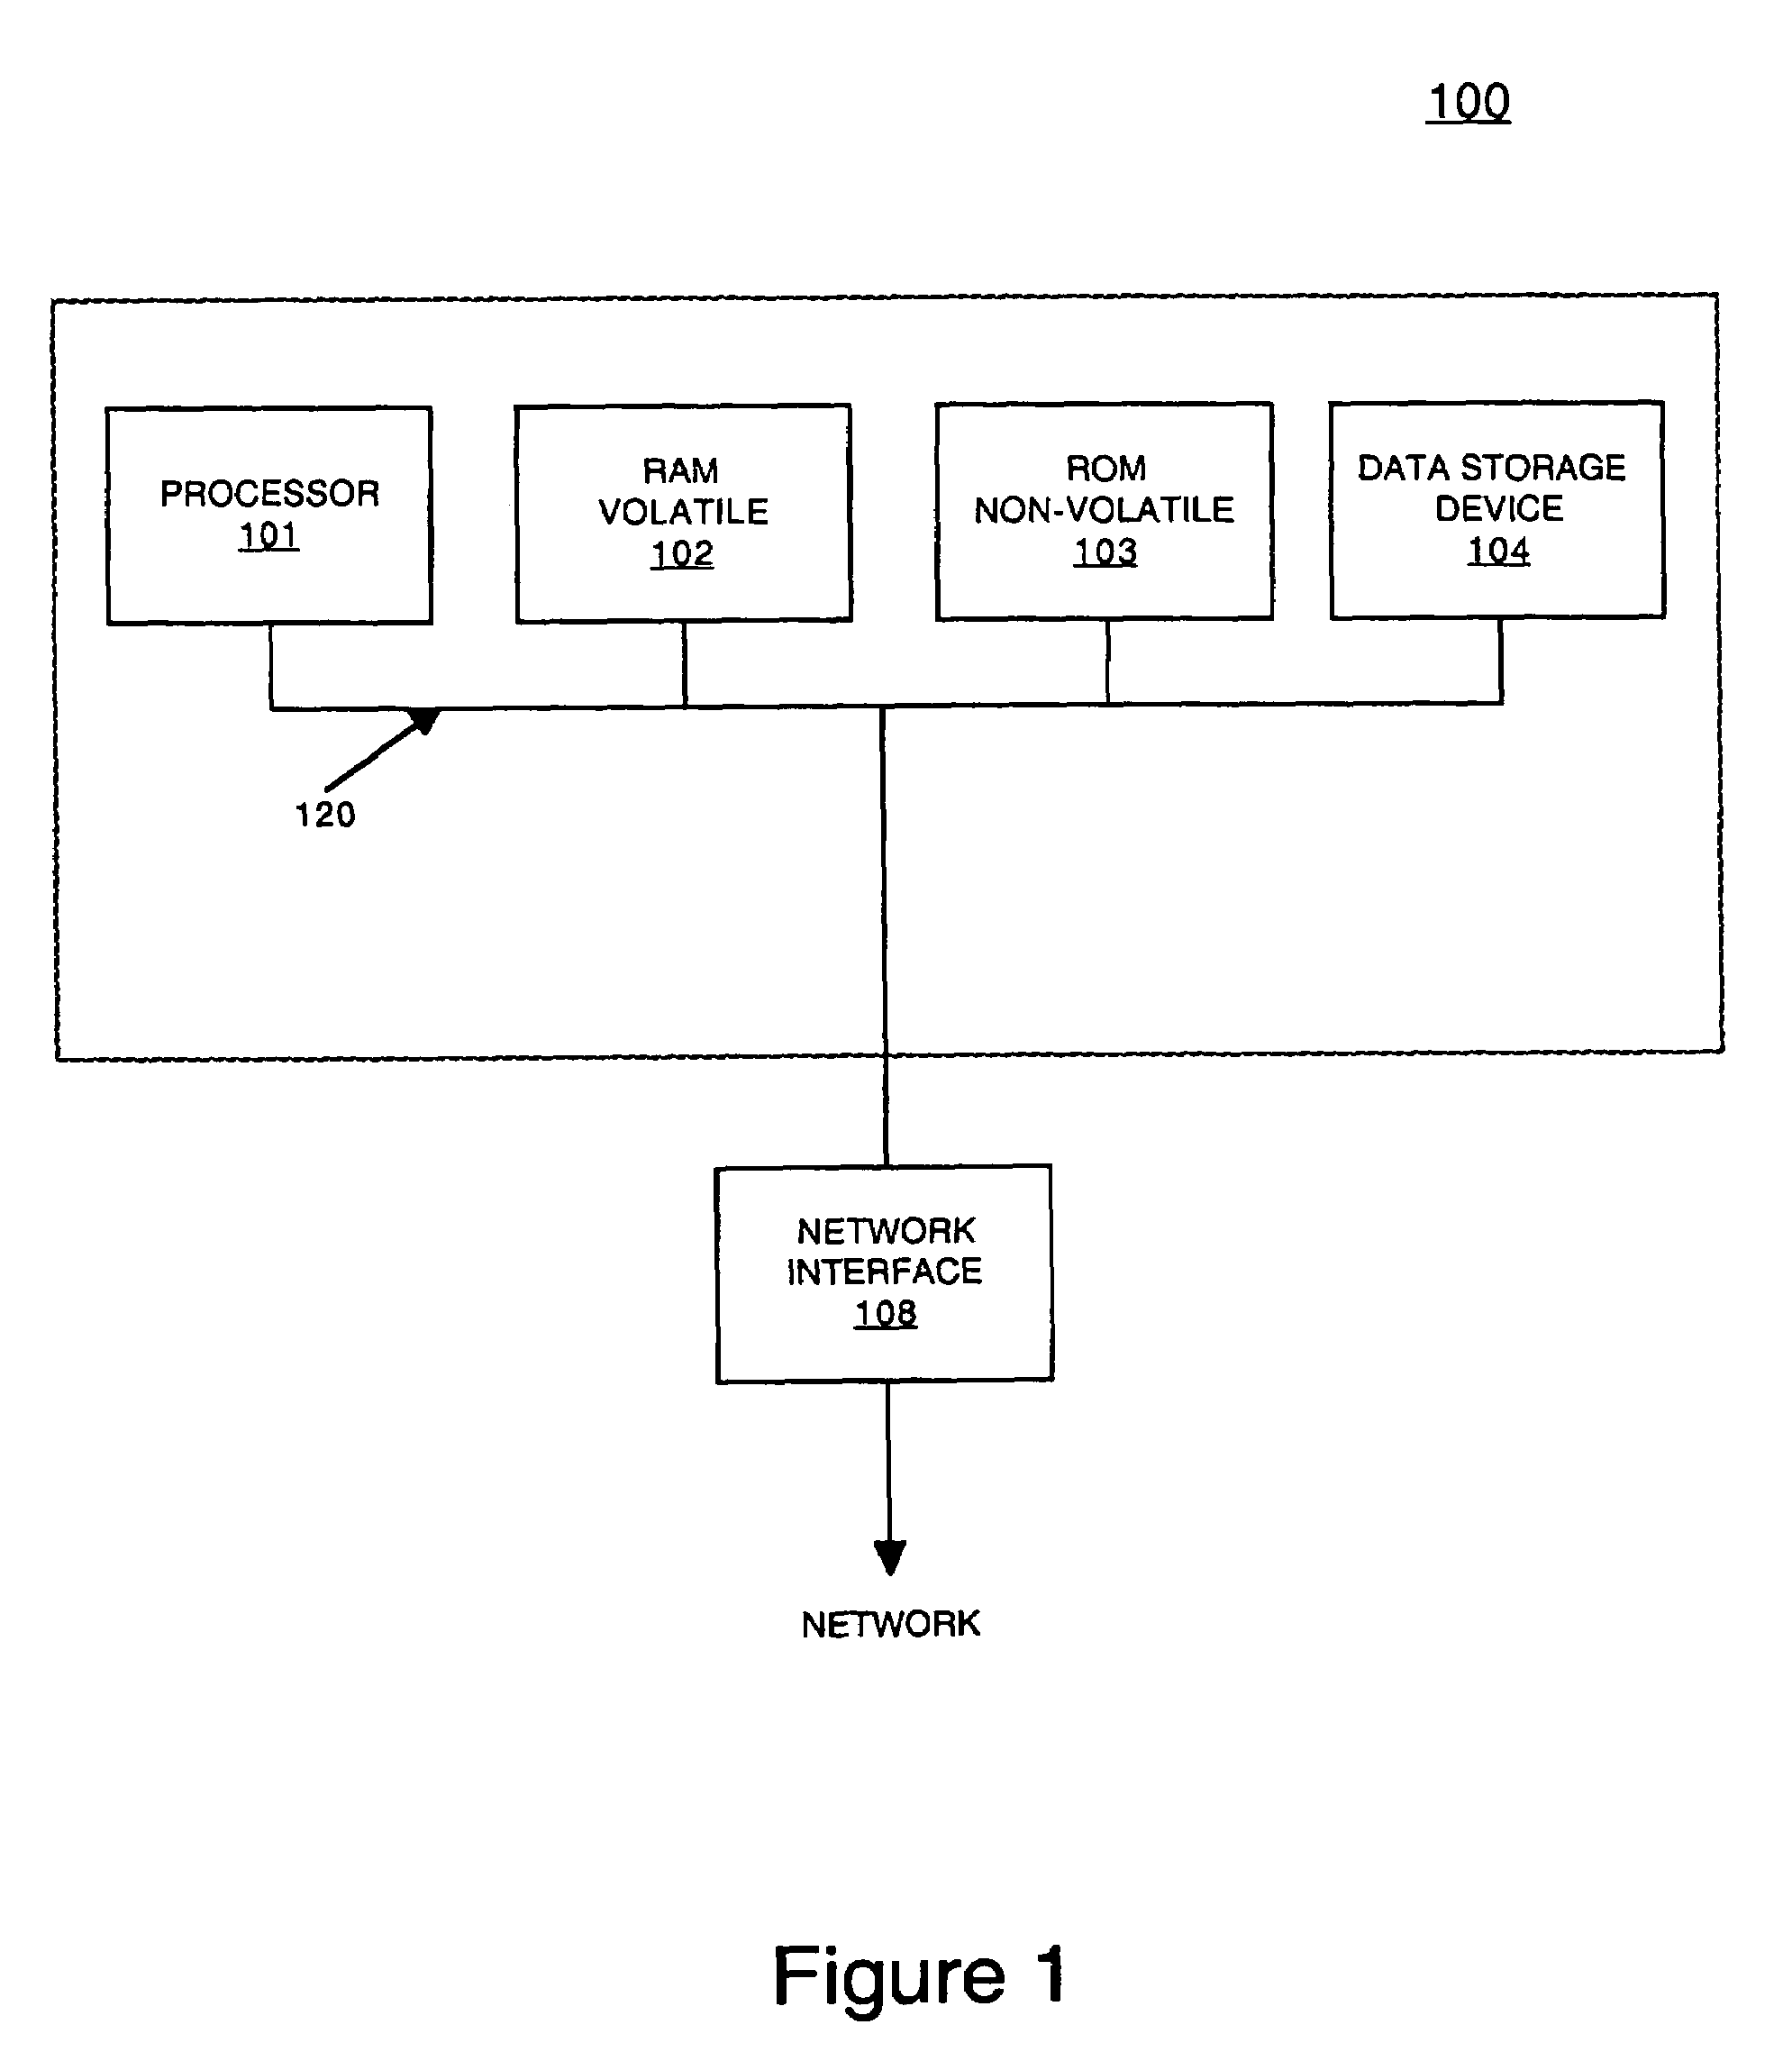 Method and system for footprint minimized, HTML/HTTP-based systems for Java-based embedded device management applications